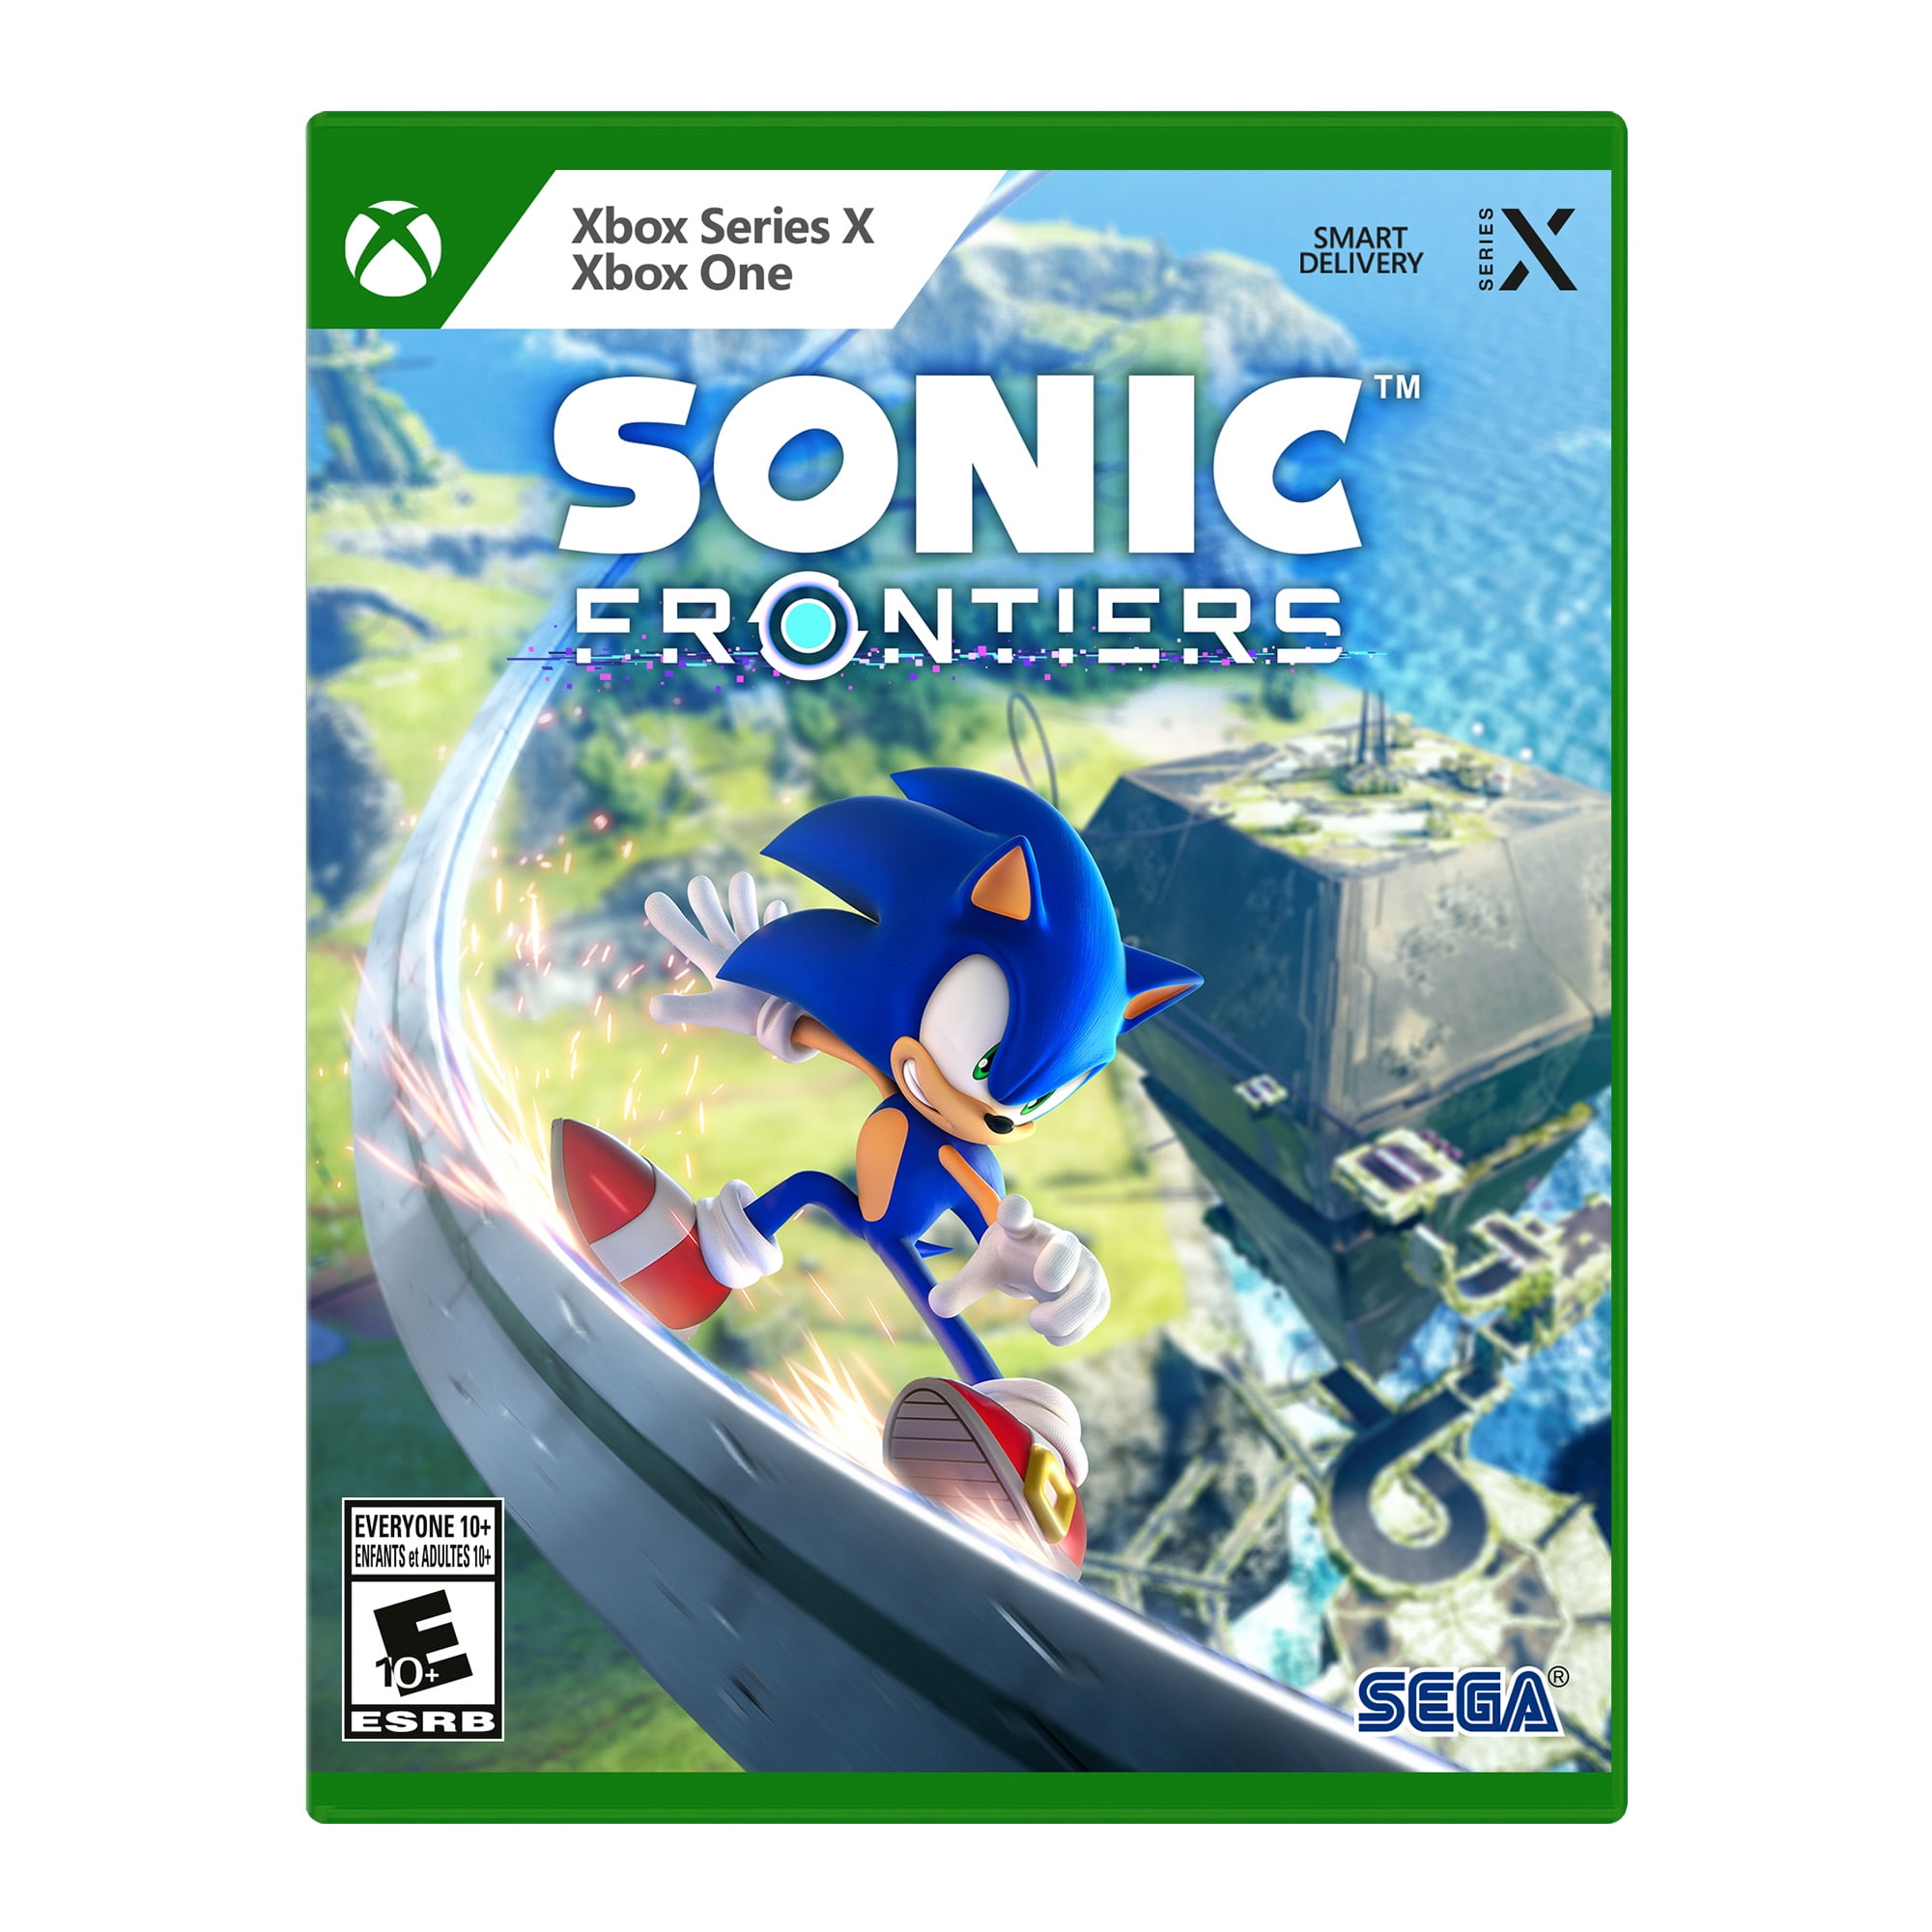 Sonic Origins Custom Switch/xbox/ps4/ps5 Cover NO GAME 